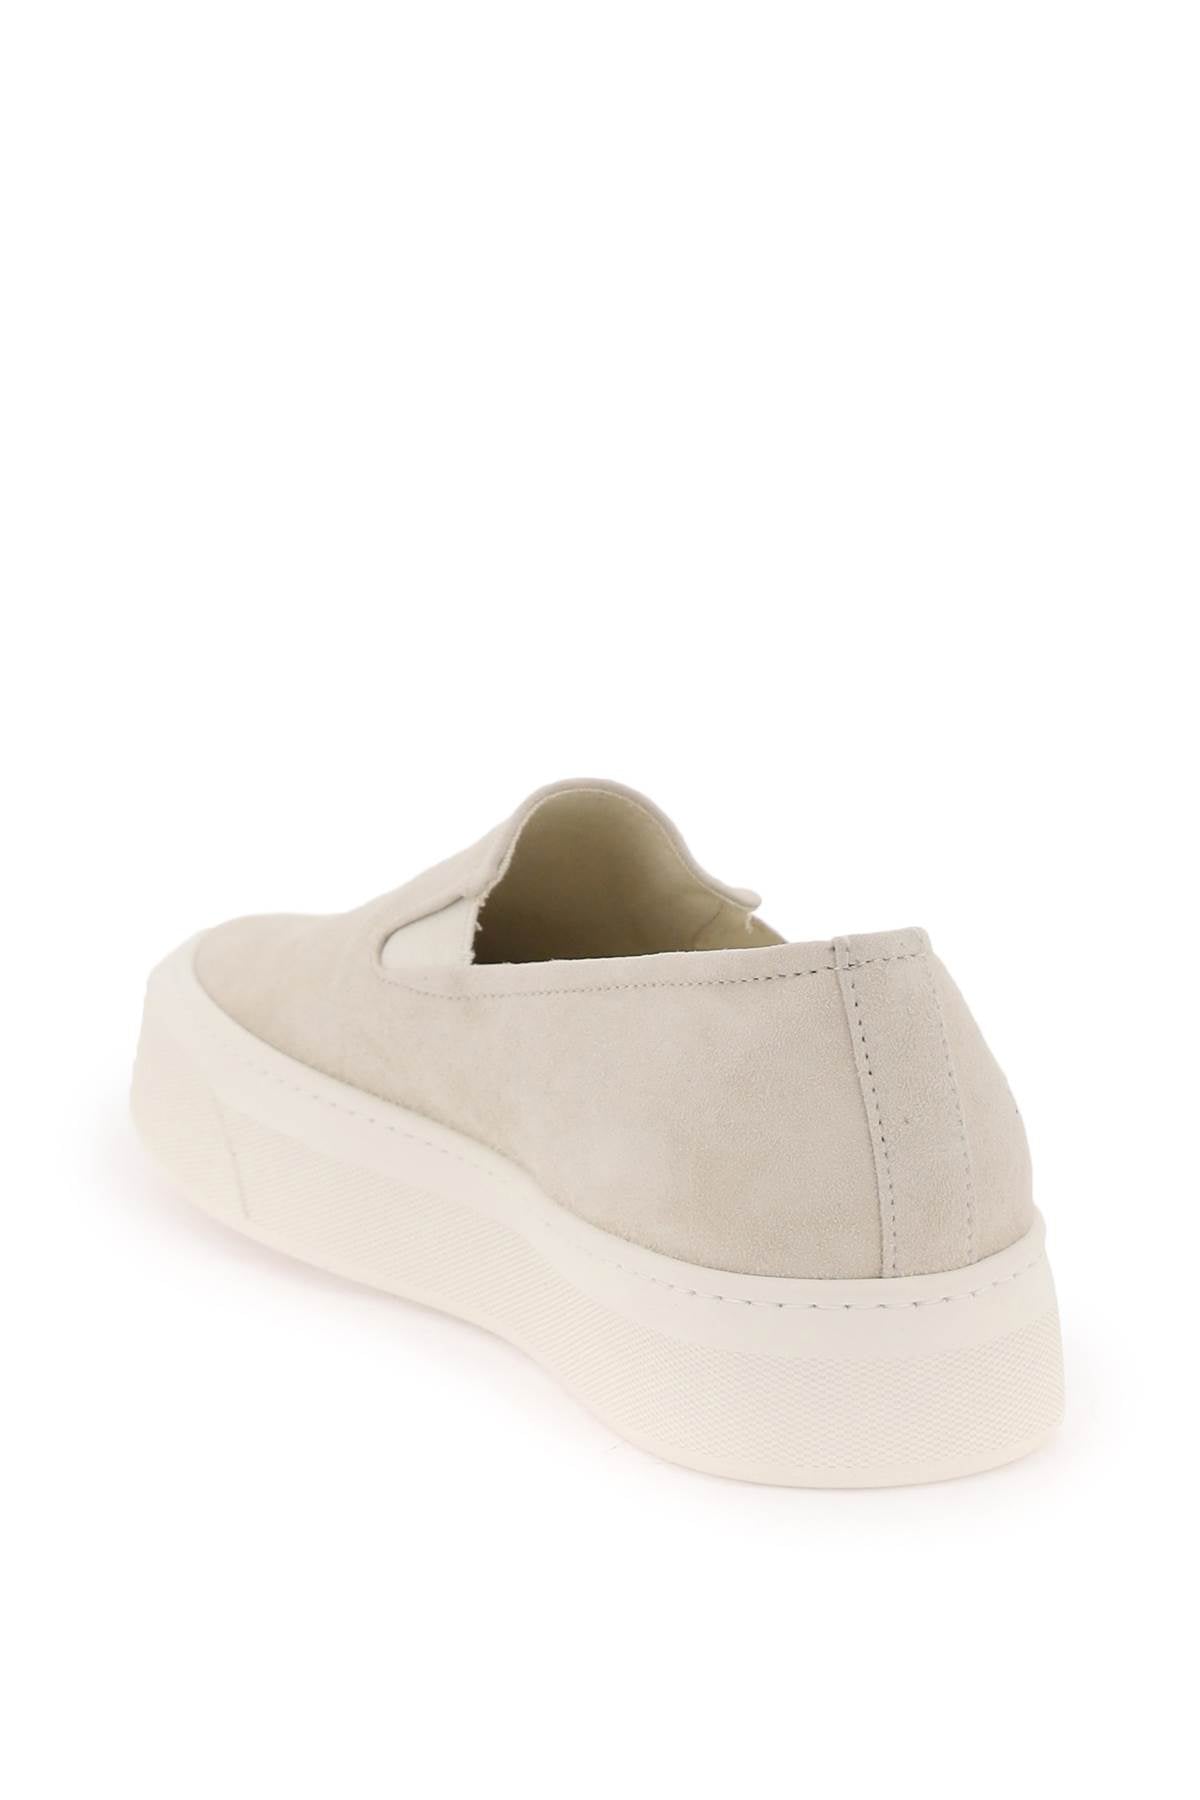 Common projects slip-on sneakers-2